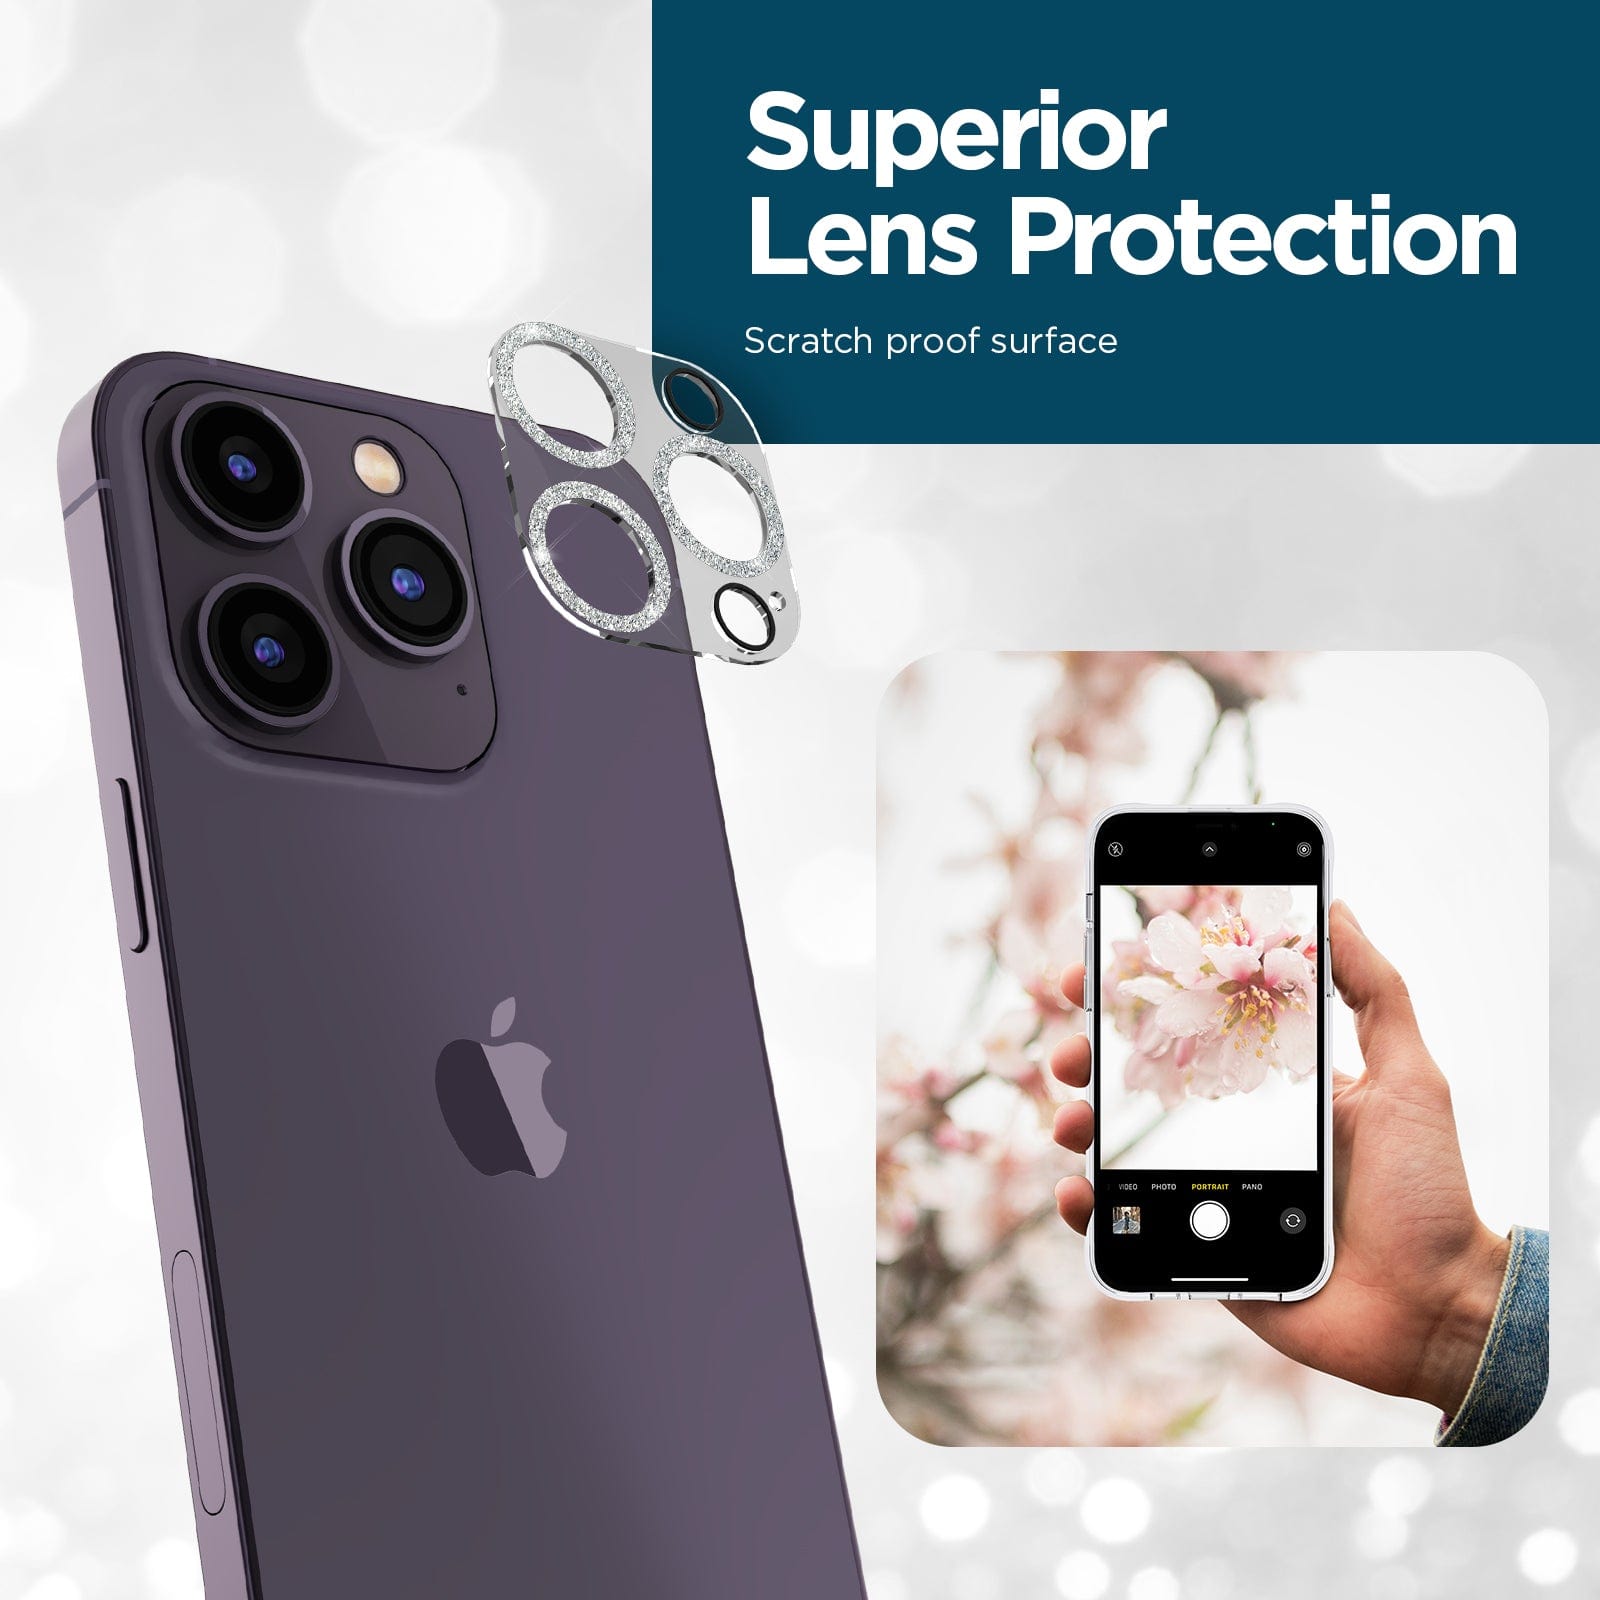 SUPERIOR LENS PROTECTION. SCRATCH PROOF SURFACE